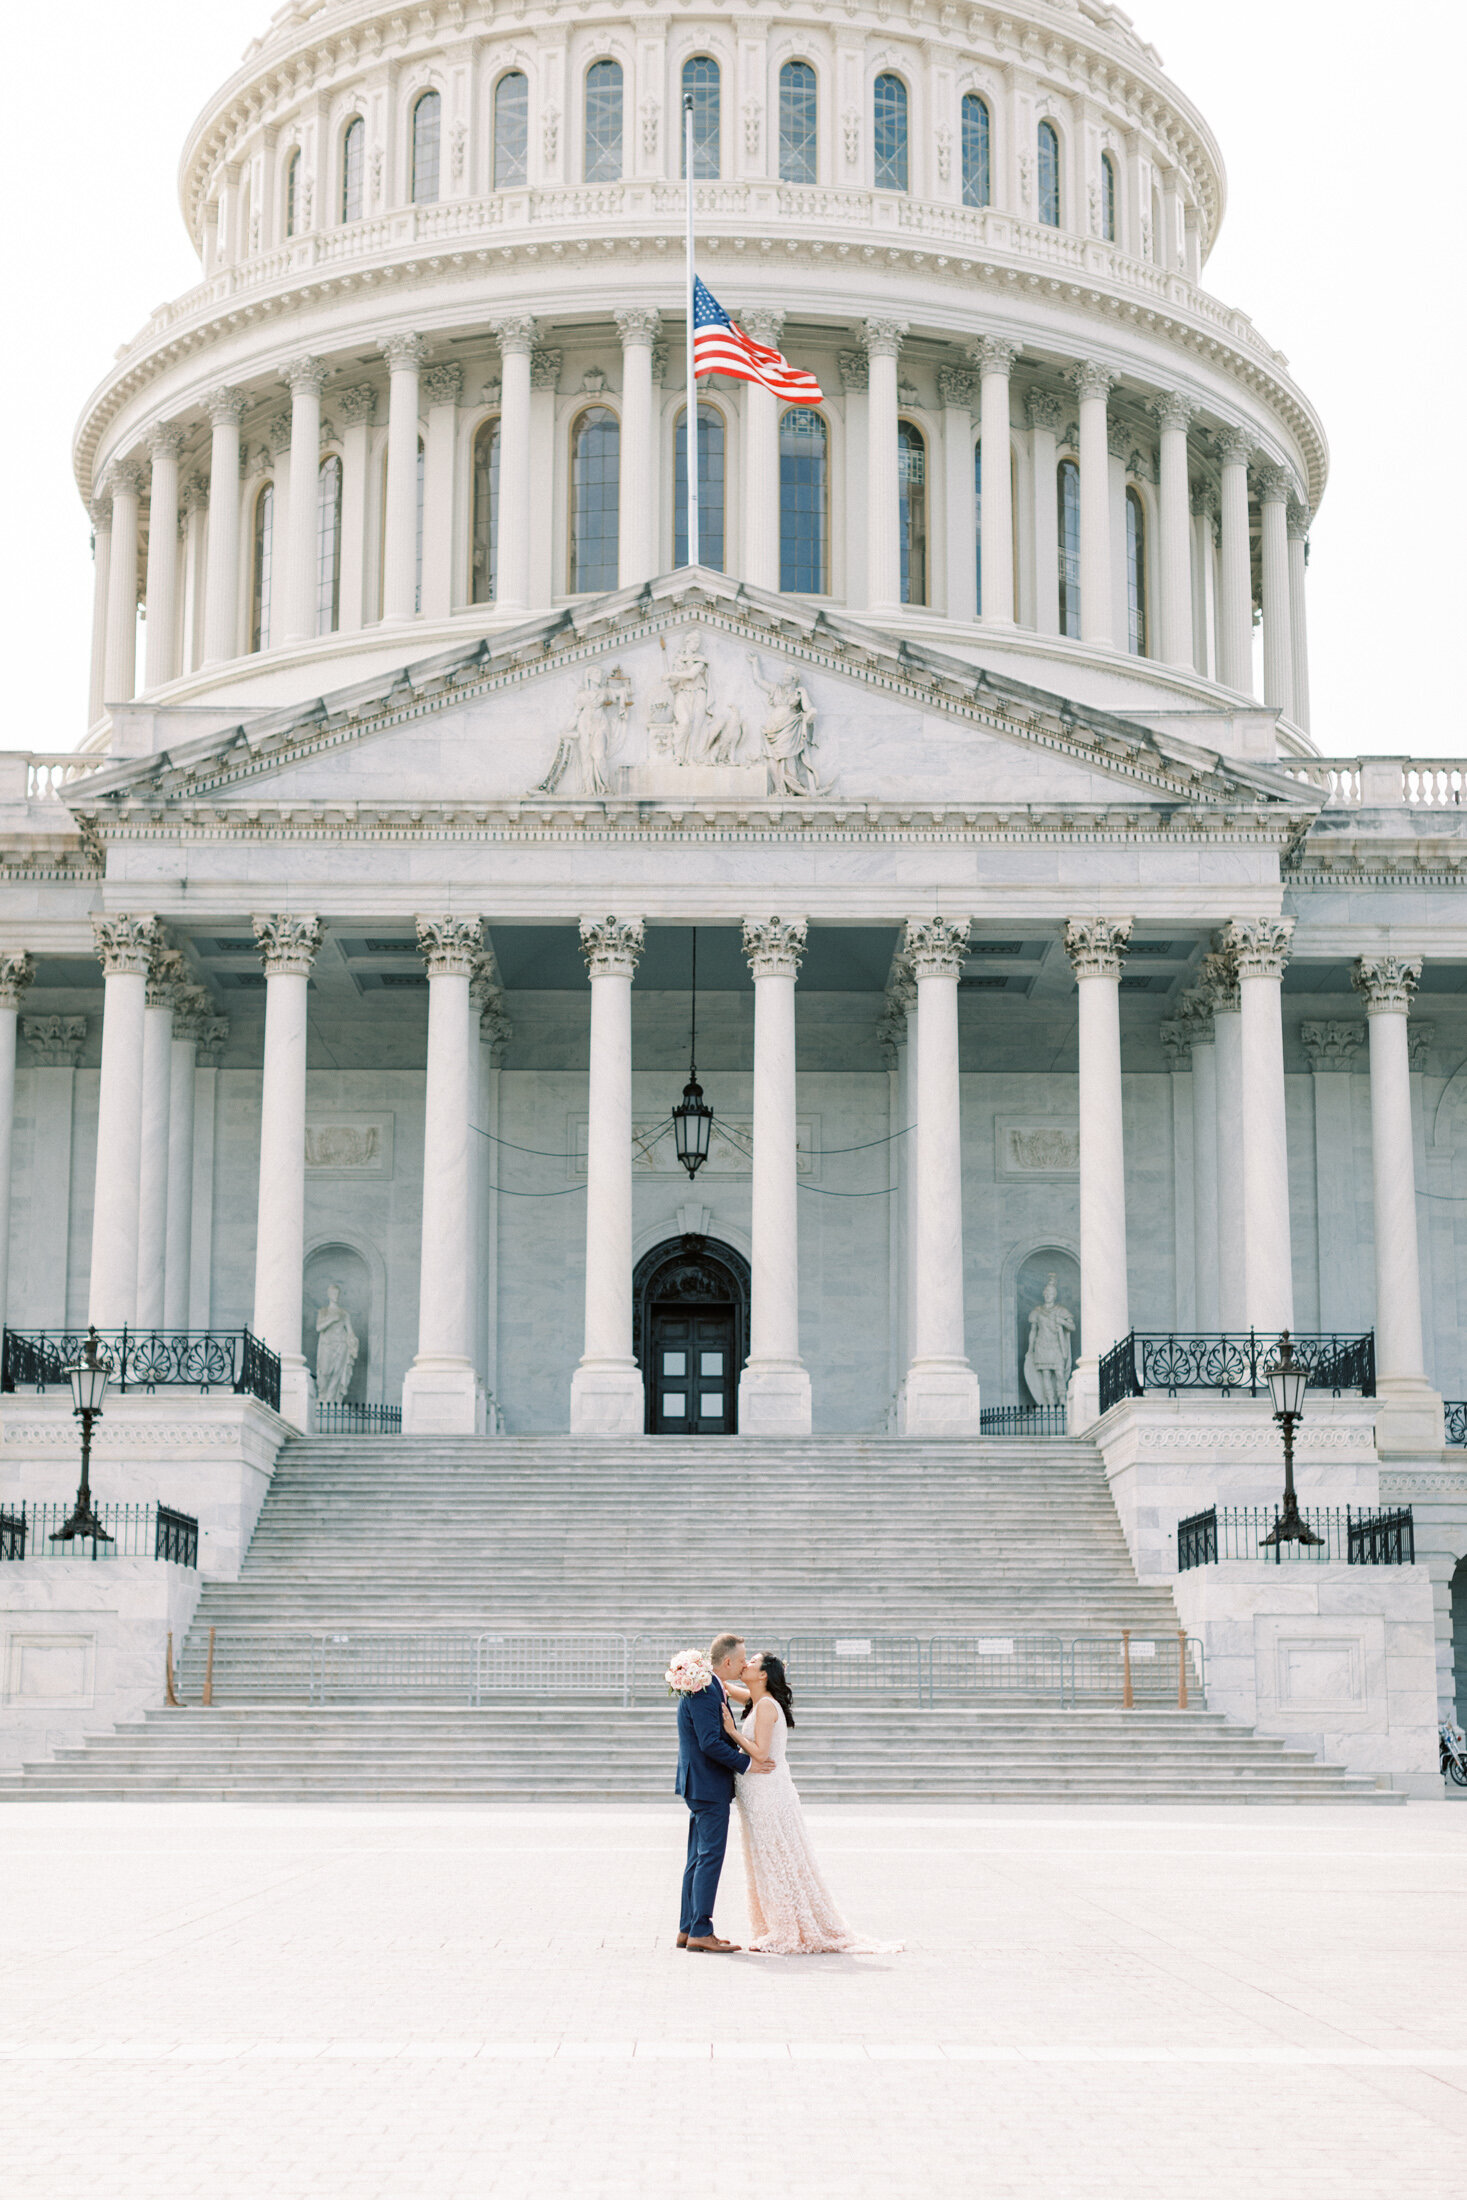 Couple kiss in front of the Supreme Court in DC